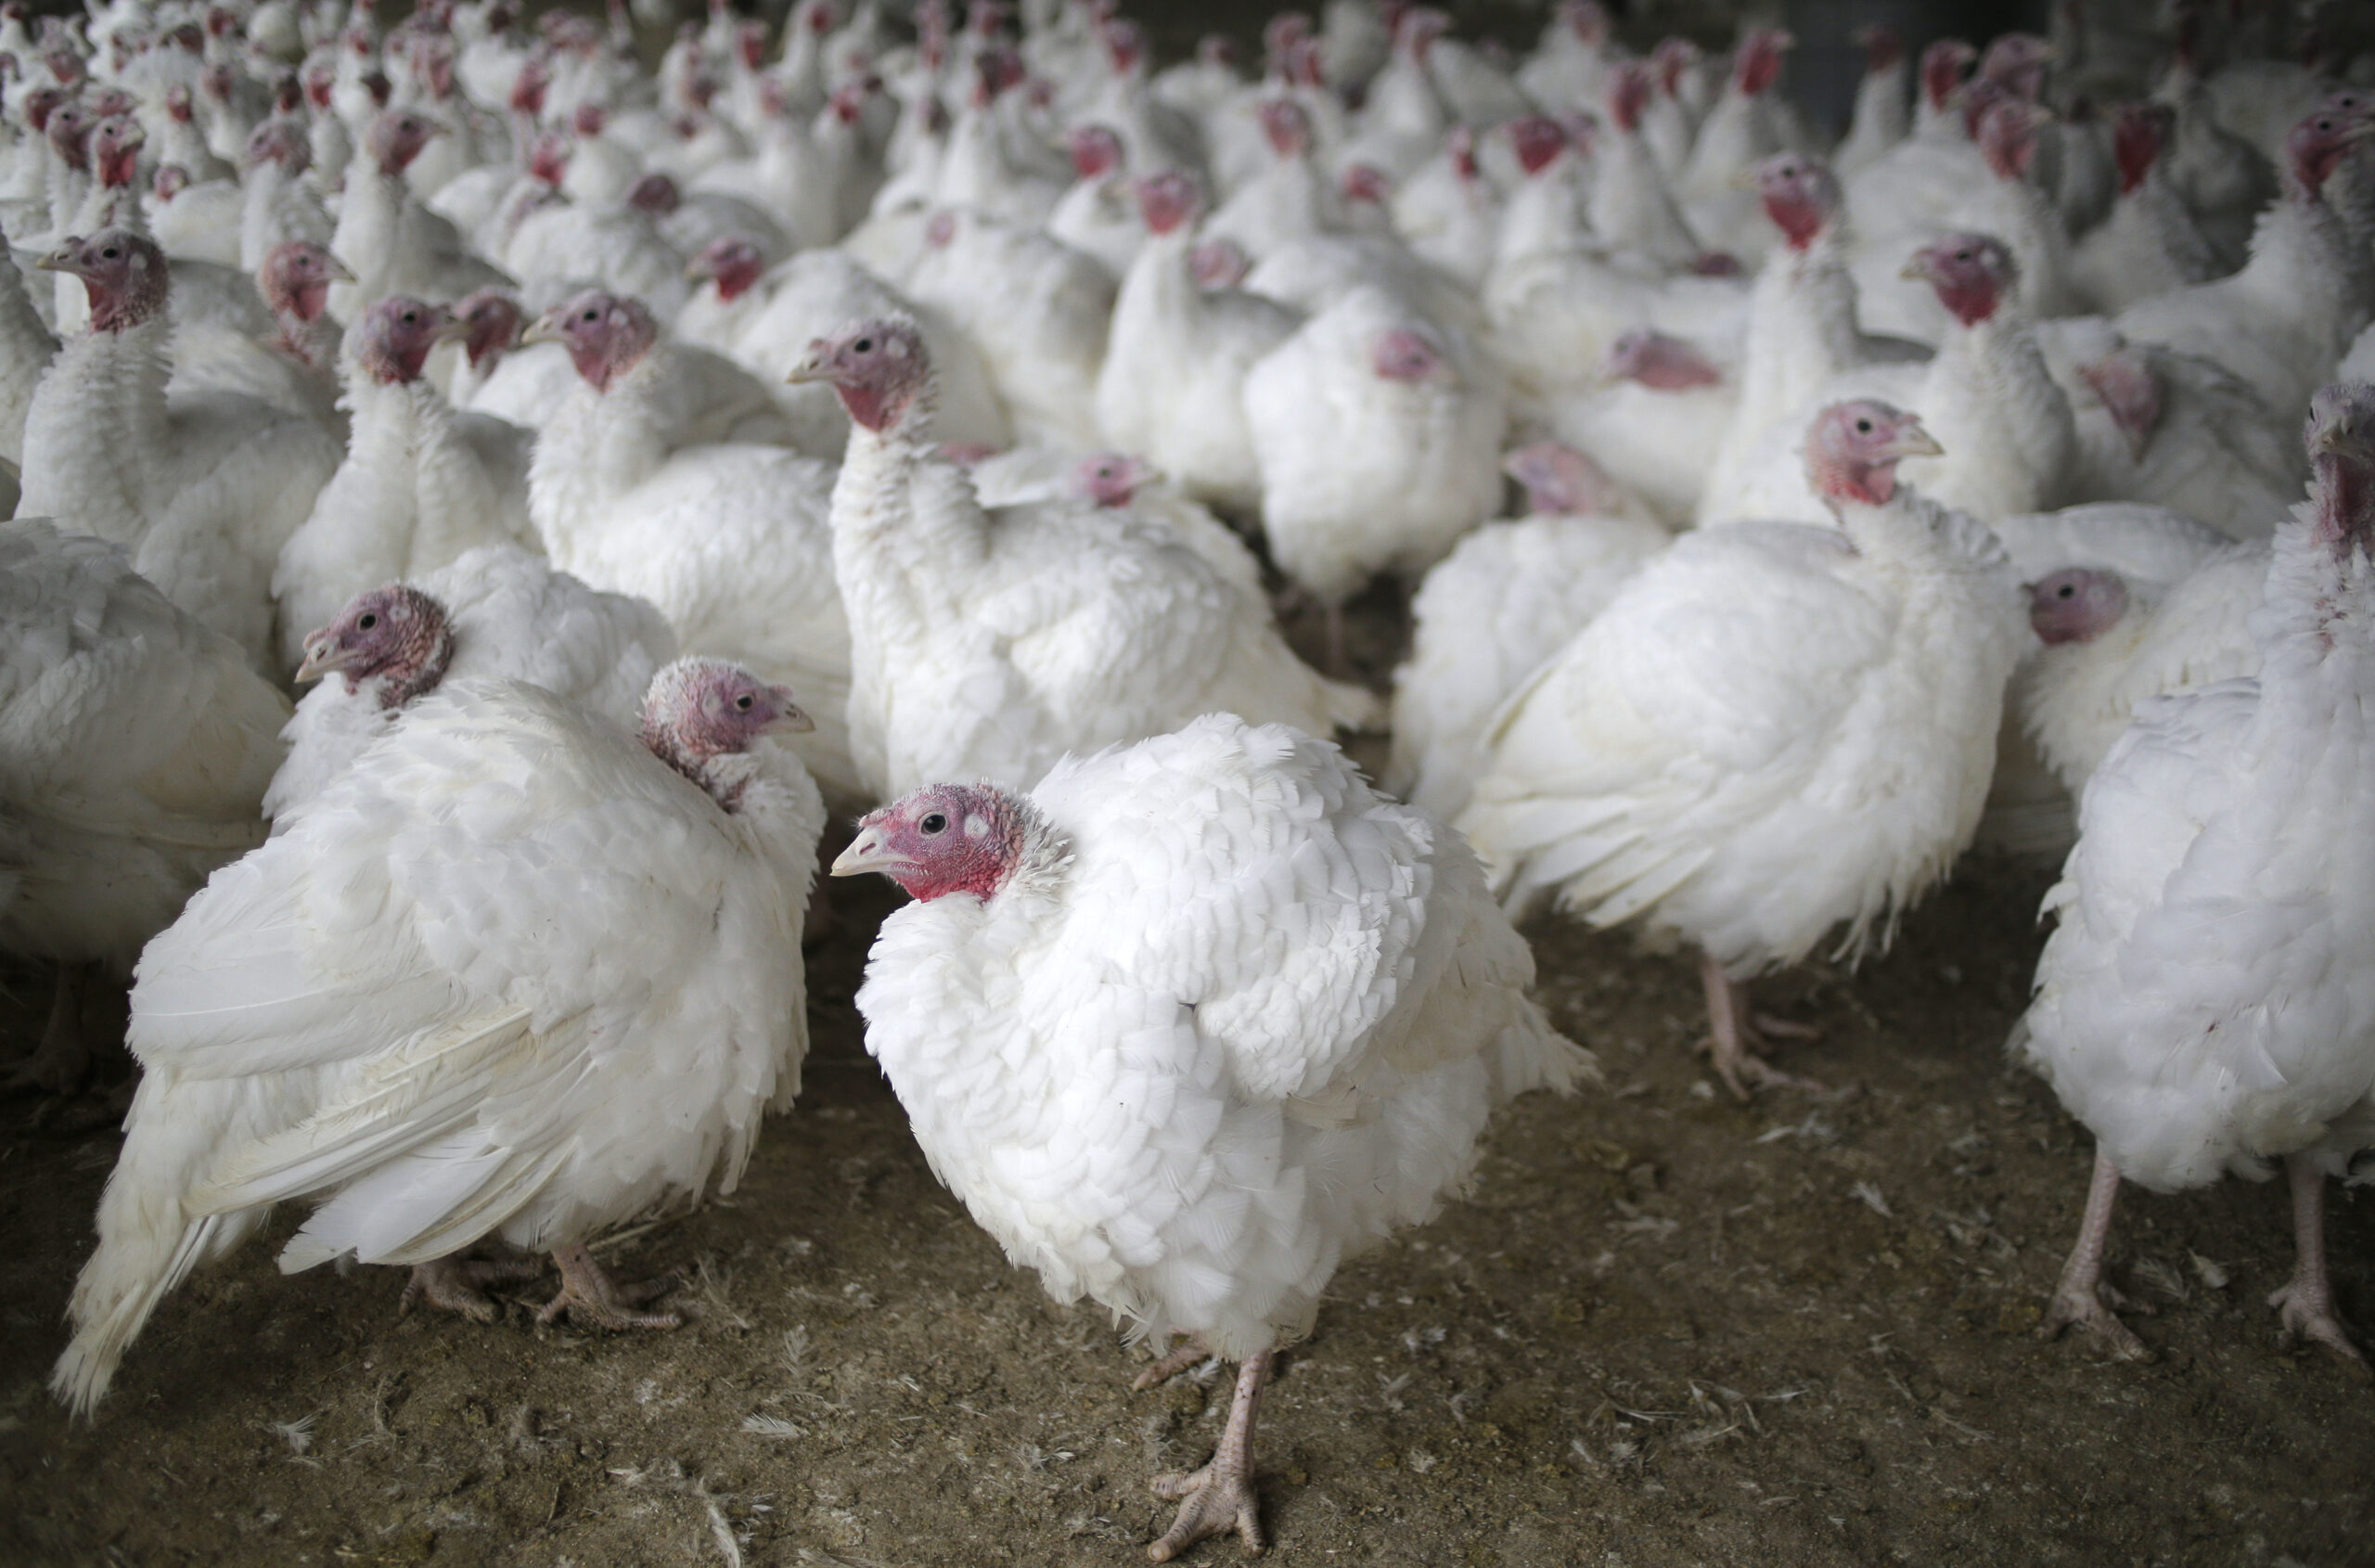 Bird flu is back in Wisconsin. Some poultry producers worry the highly contagious disease is here to stay.